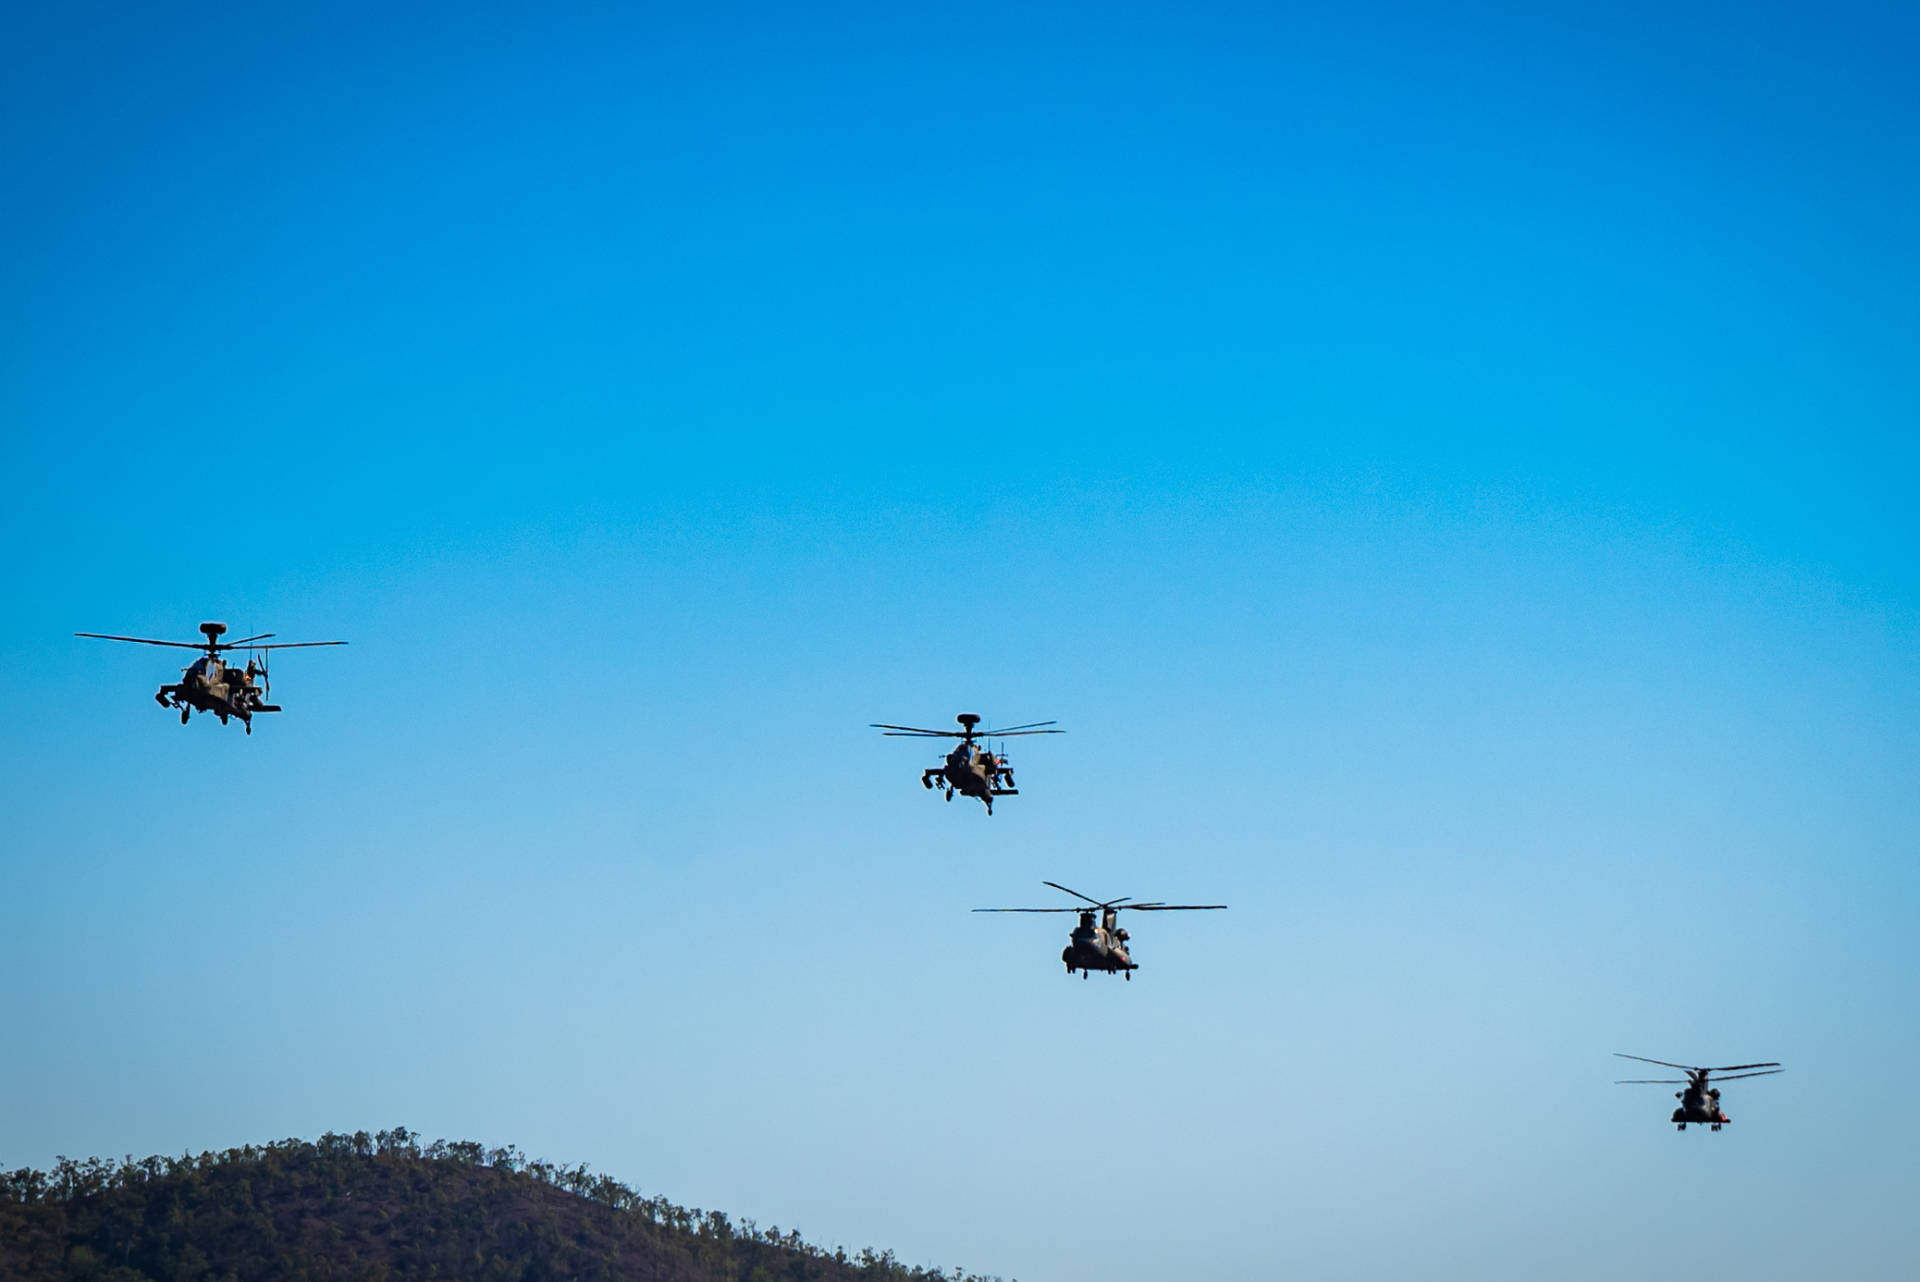 The RSAF's CH-47F Chinook and AH-64D Apache helicopters conducting joint training in the SWBTA during XWB21.